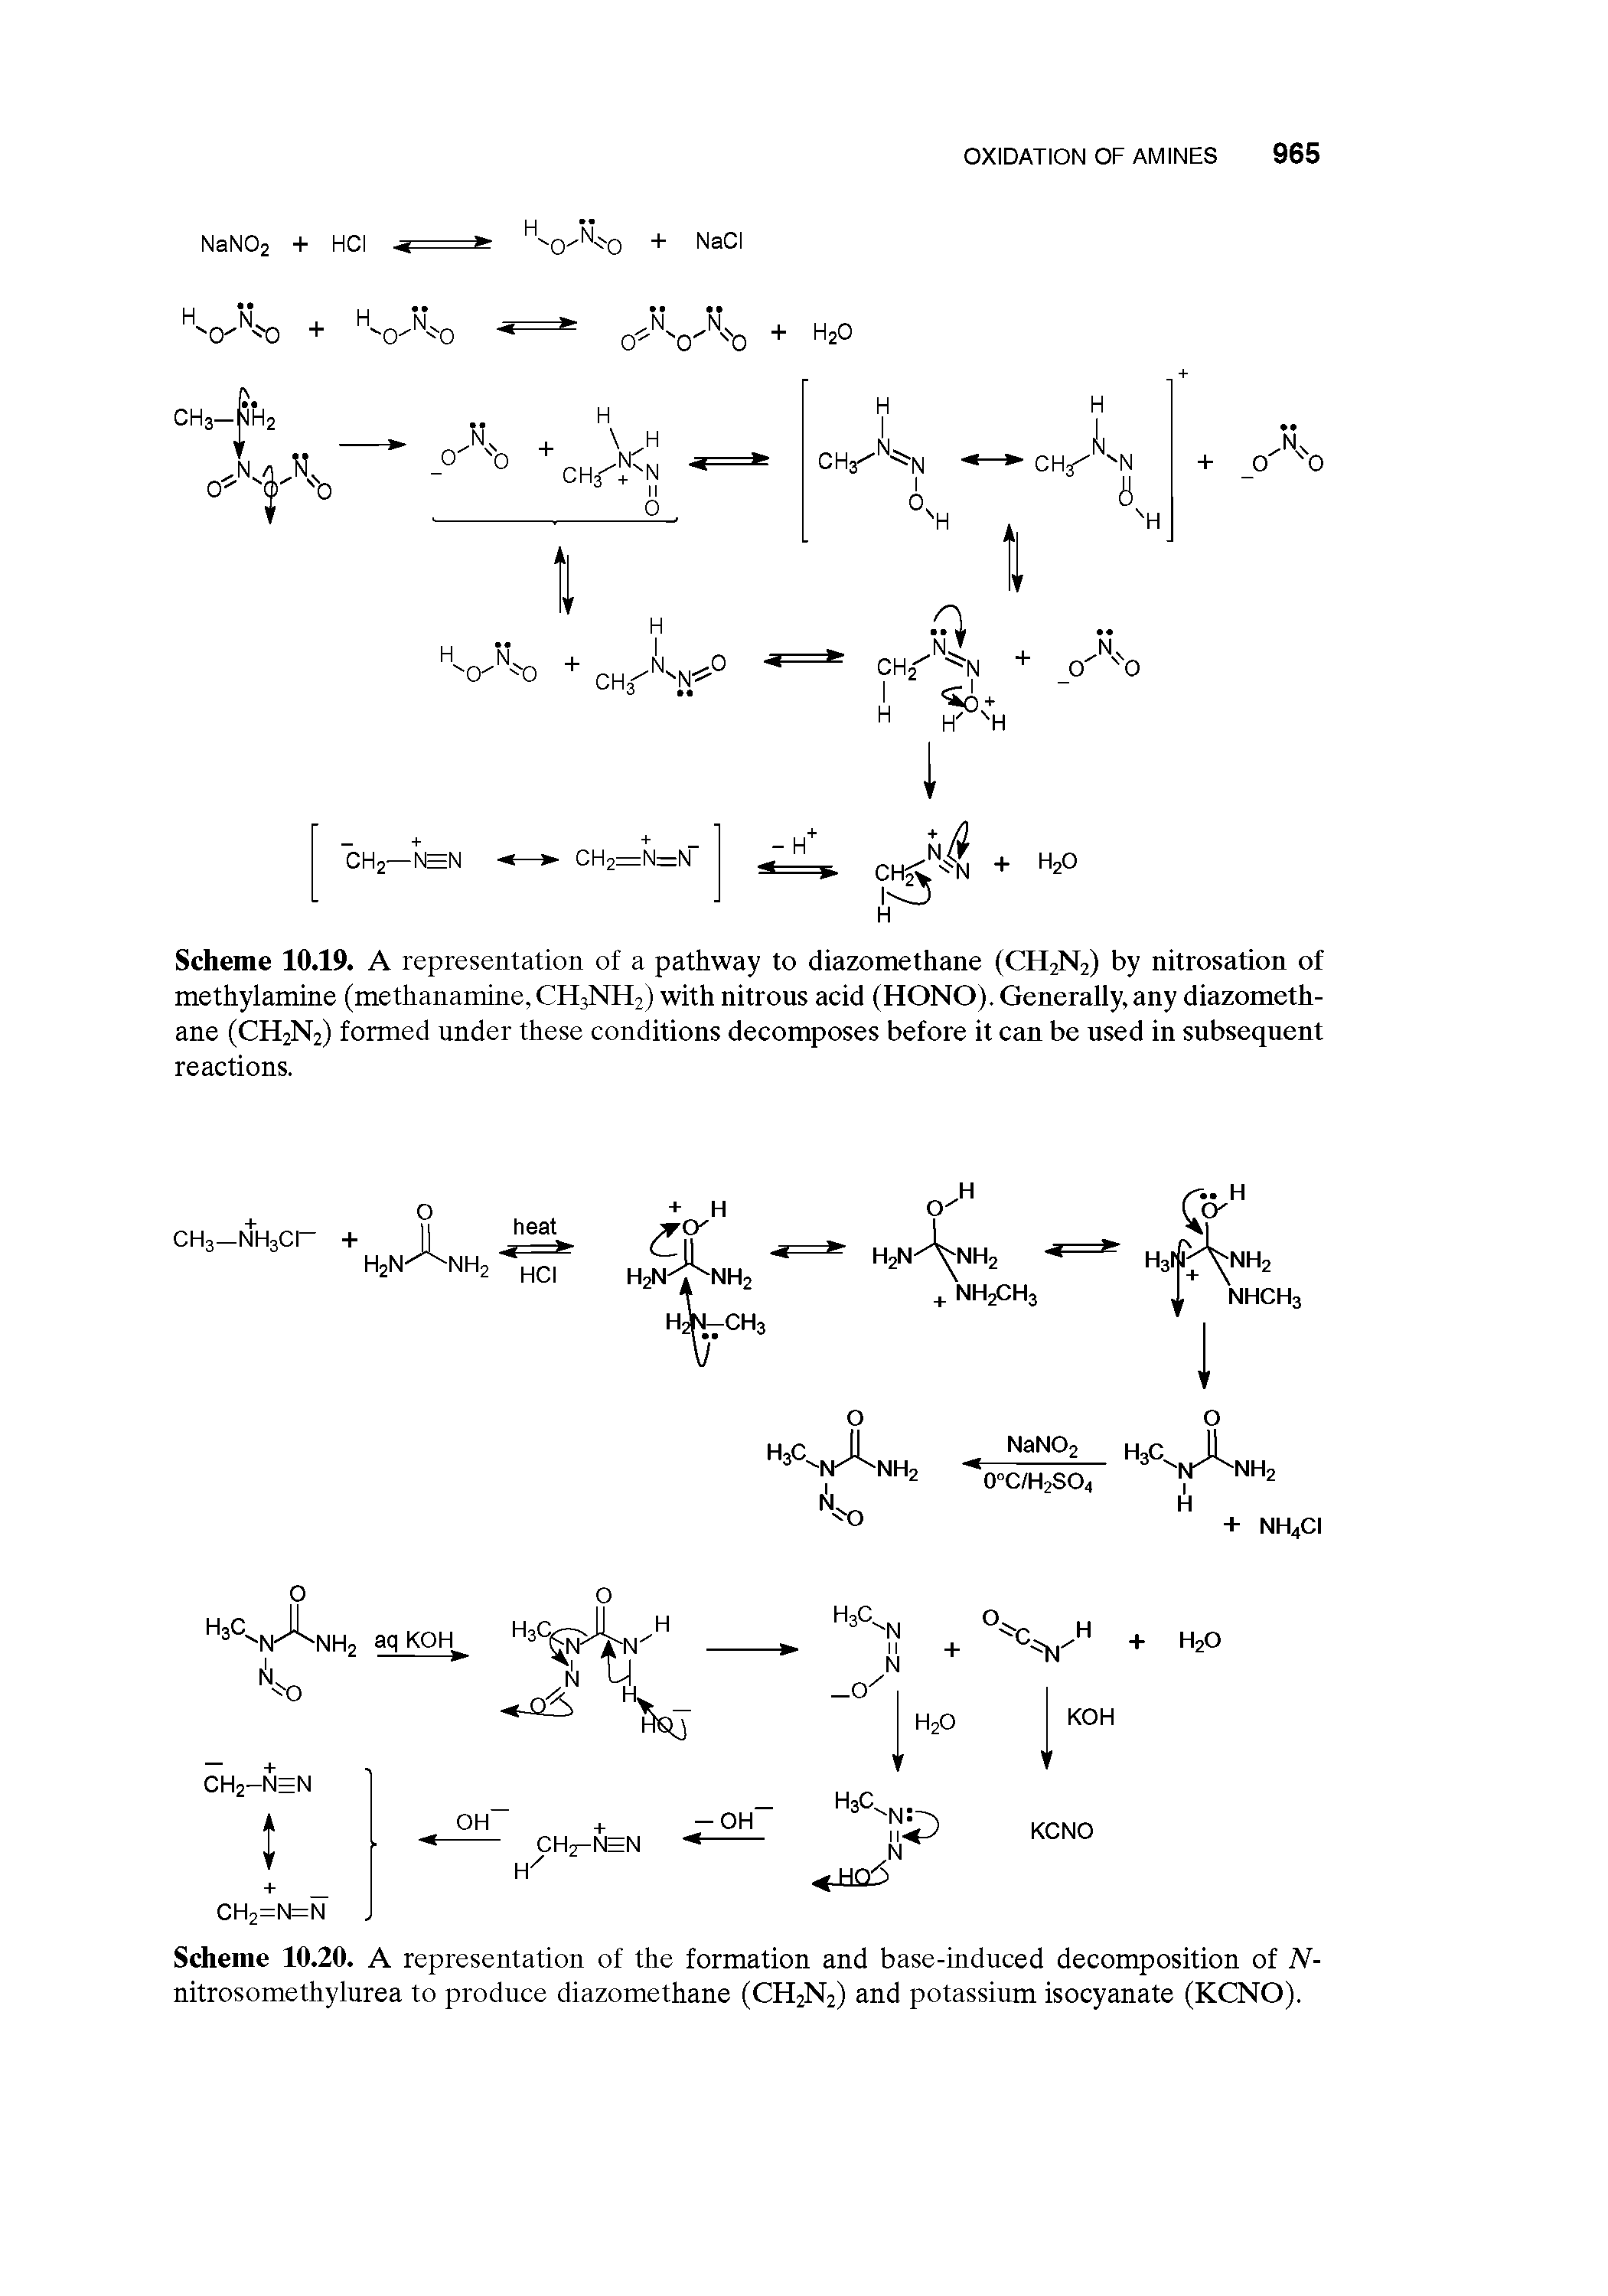 Scheme 10.20. A representation of the formation and base-induced decomposition of N-nitrosomethylurea to produce diazomethane (CH2N2) and potassium isocyanate (KCNO).